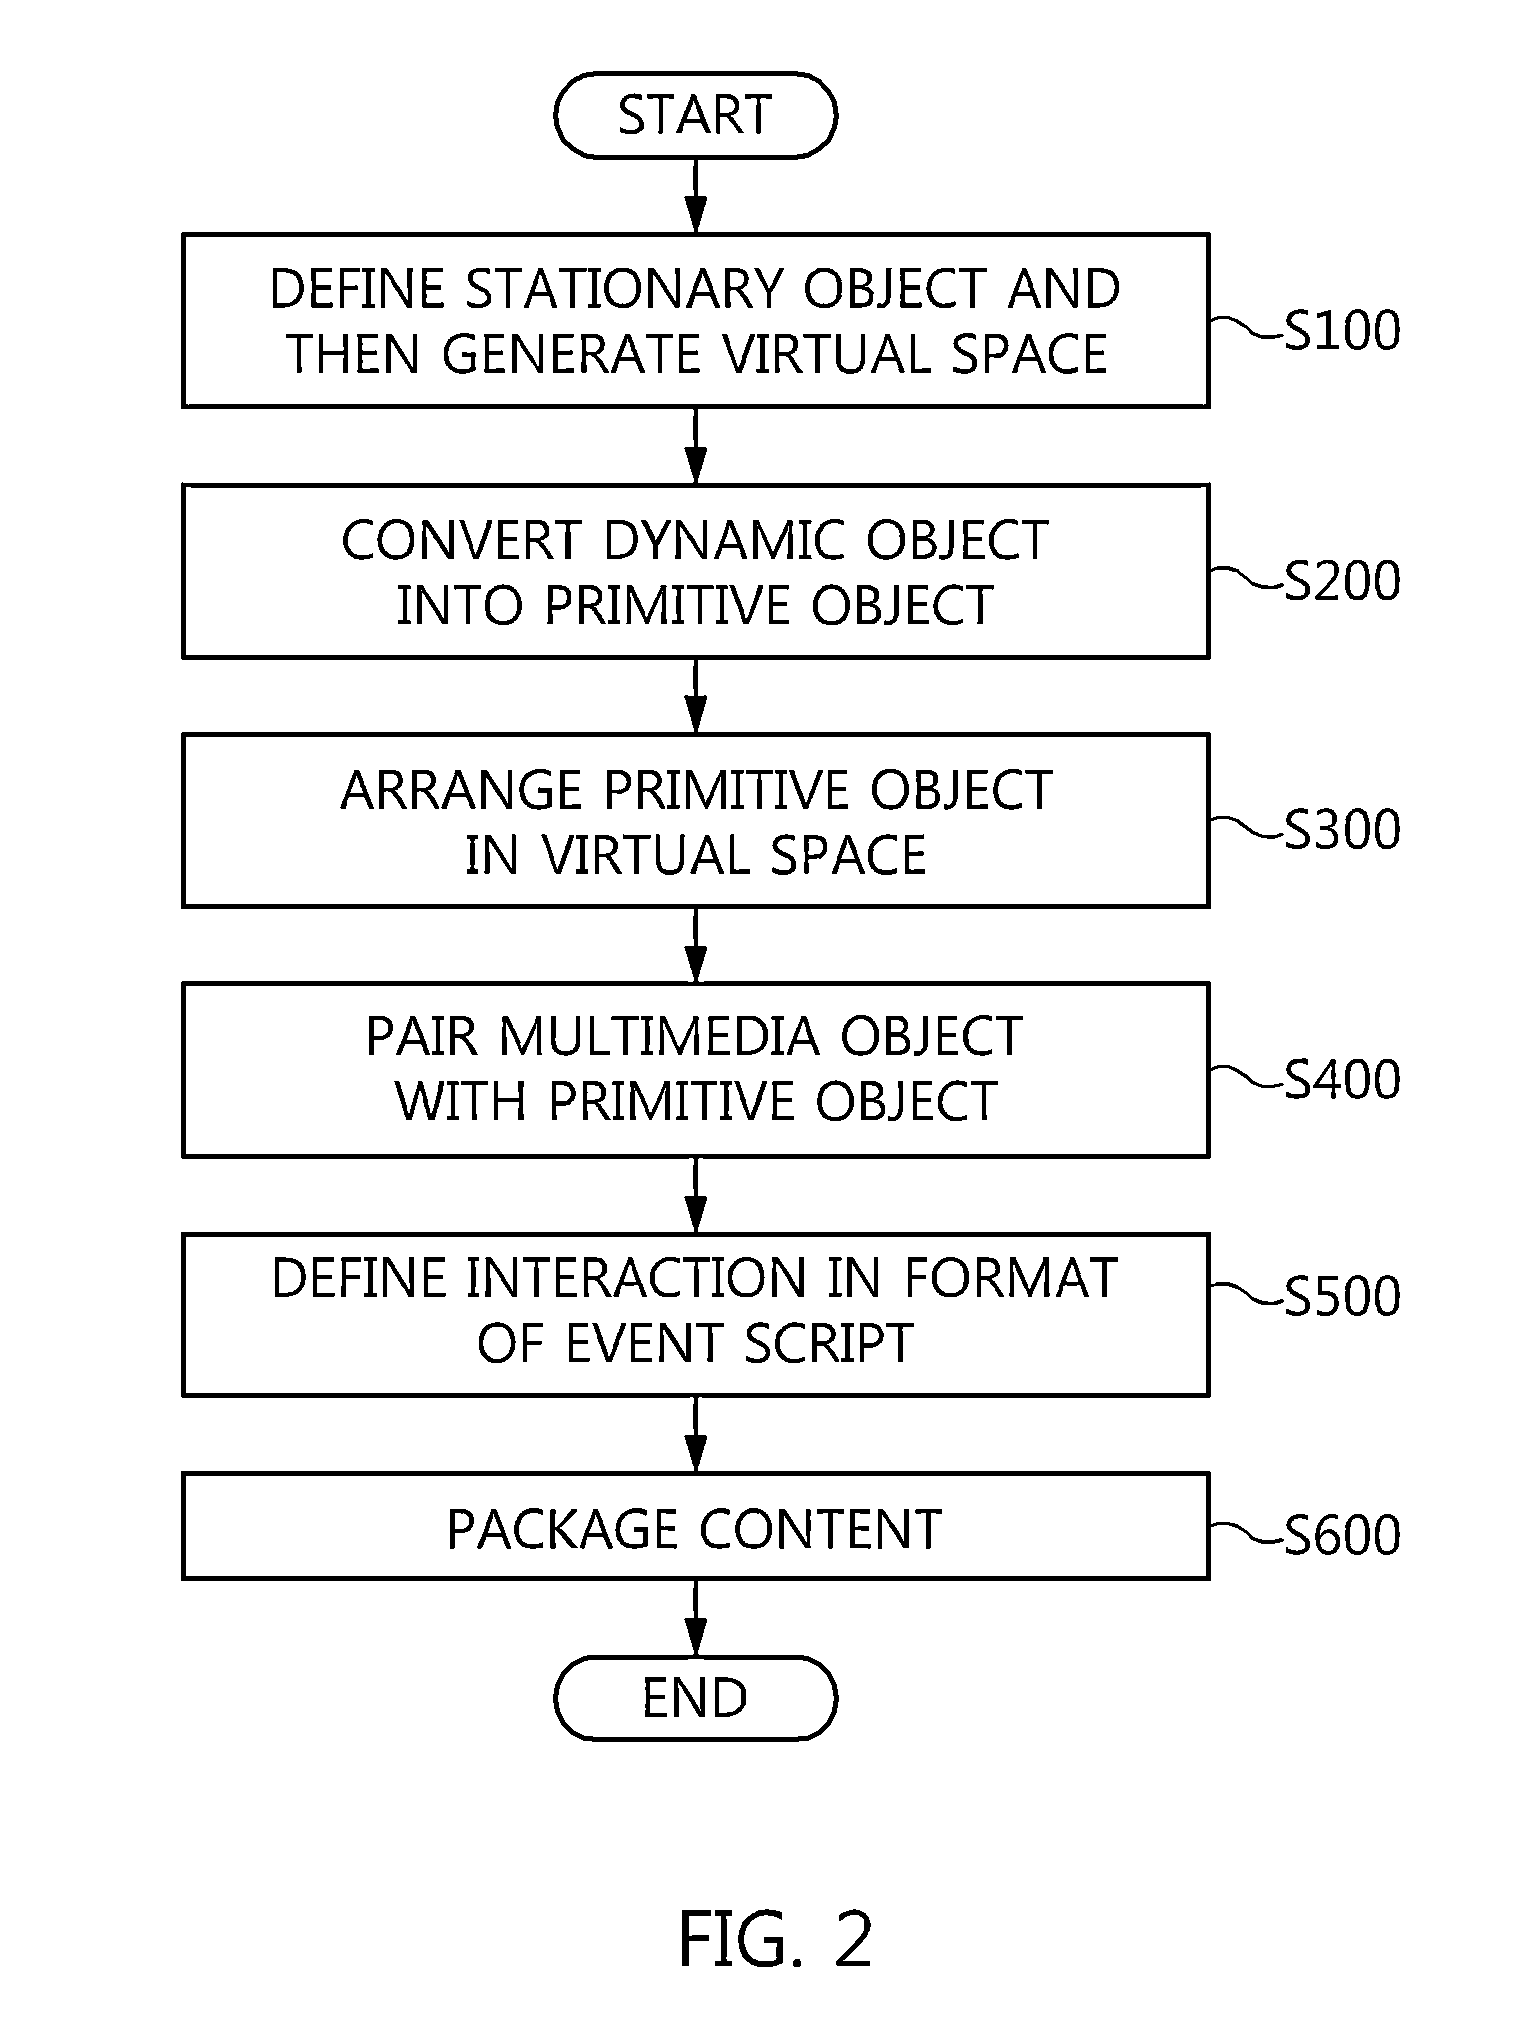 Apparatus and method for creating spatial augmented reality content